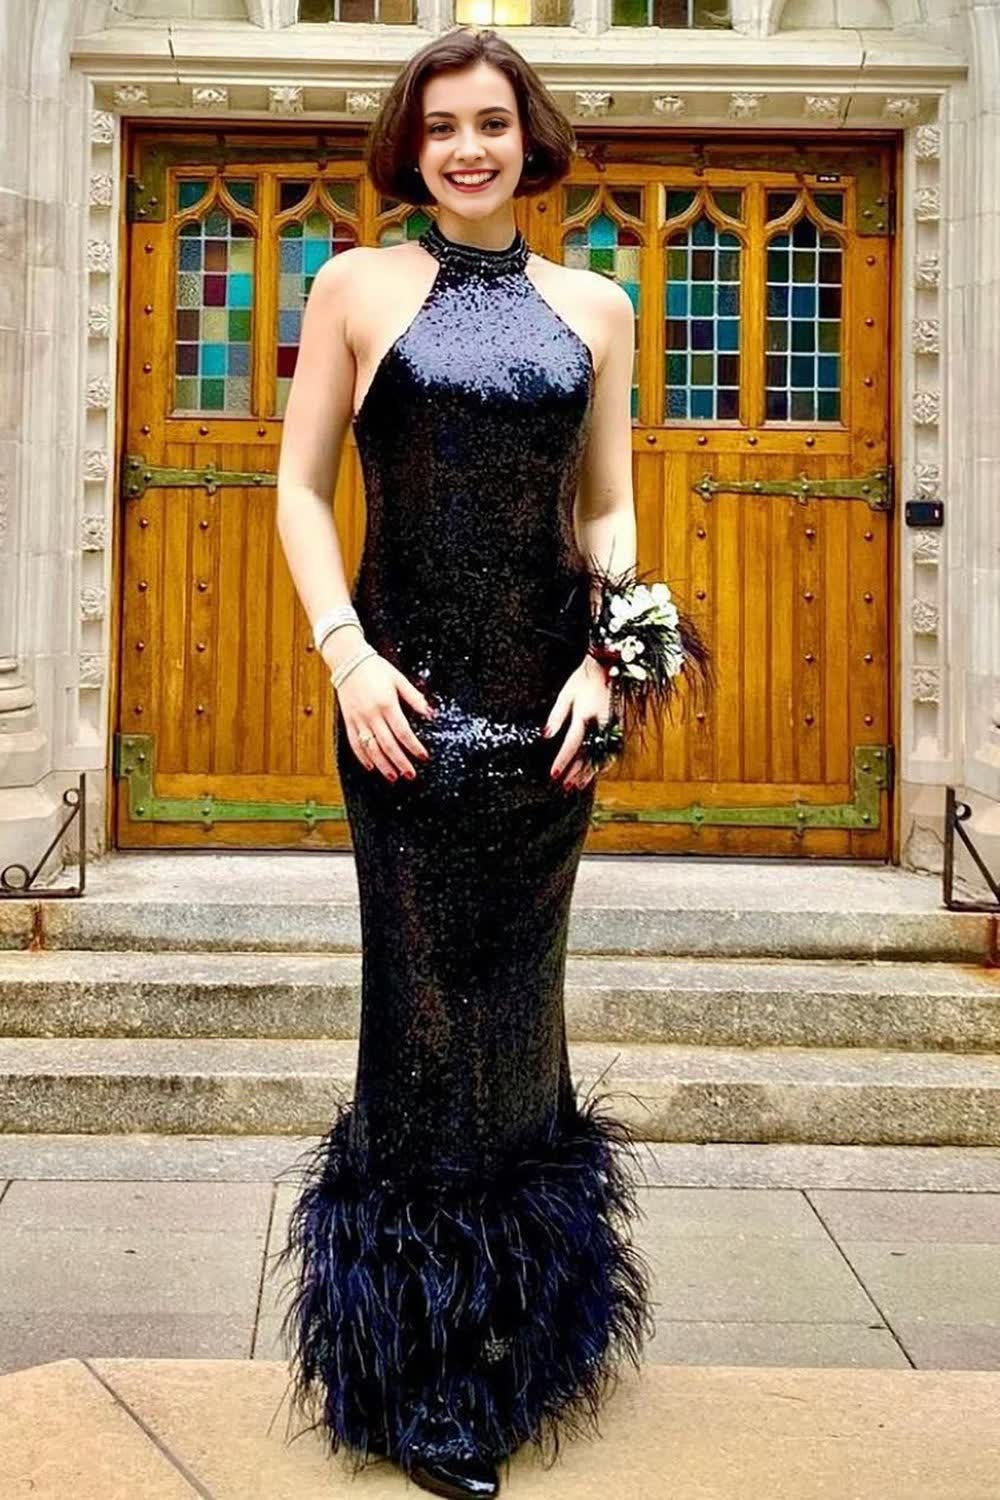 Mermaid Halter Black Sequins Long Vintage Corset Prom Dress with Feathers outfit, Mermaid Halter Black Sequins Long Vintage Prom Dress with Feathers